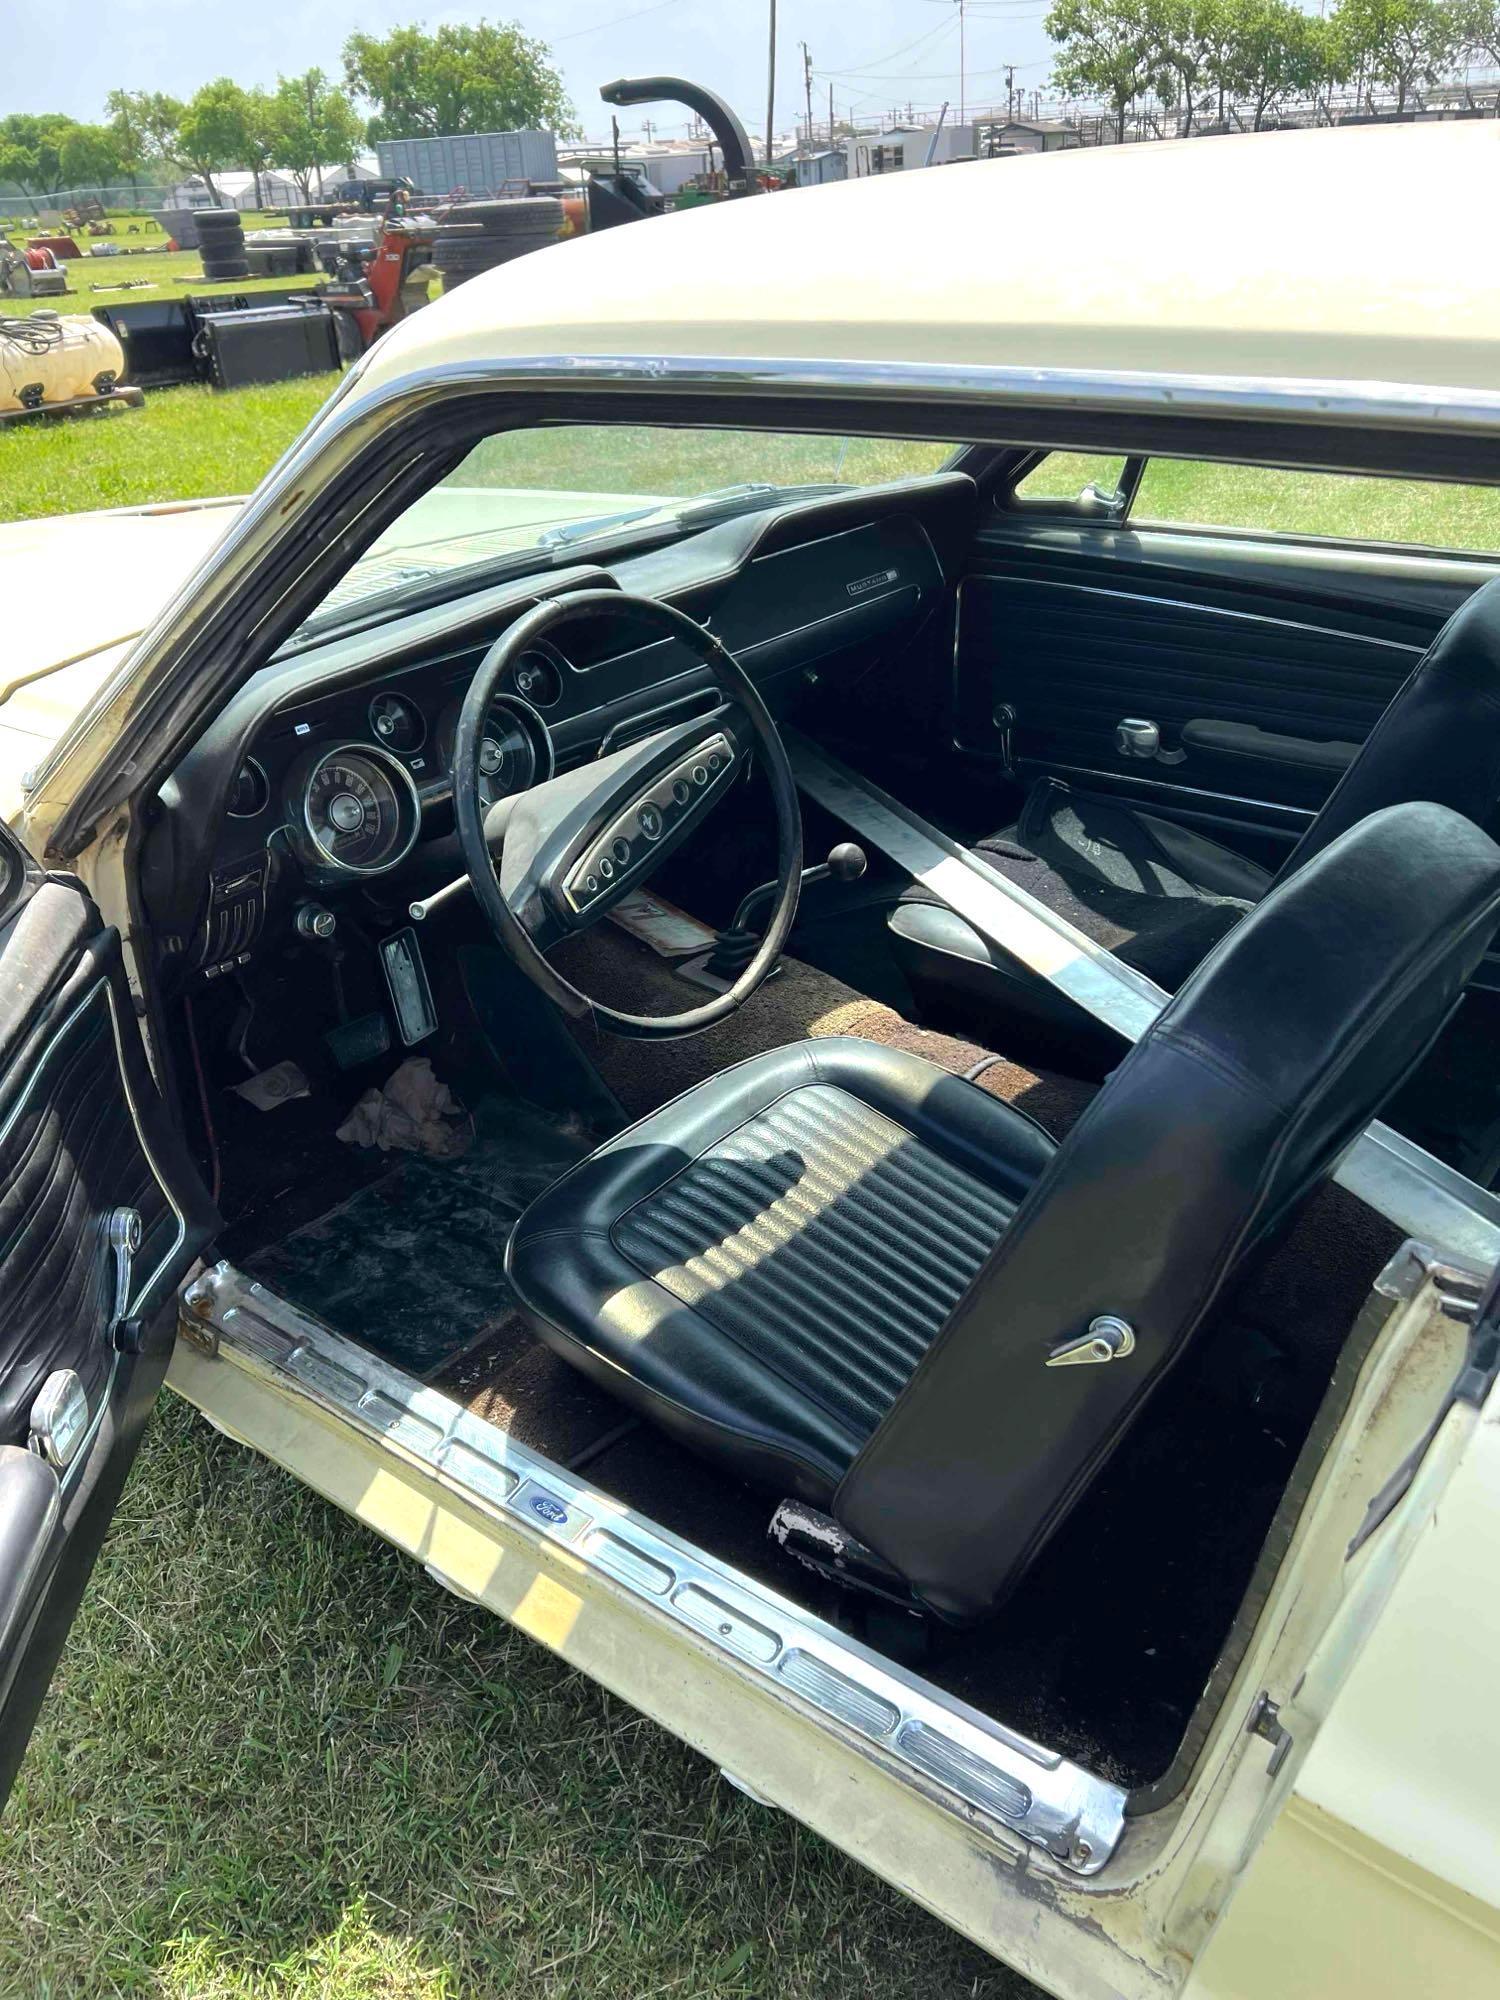 1968 Ford Mustang - 78,060 miles